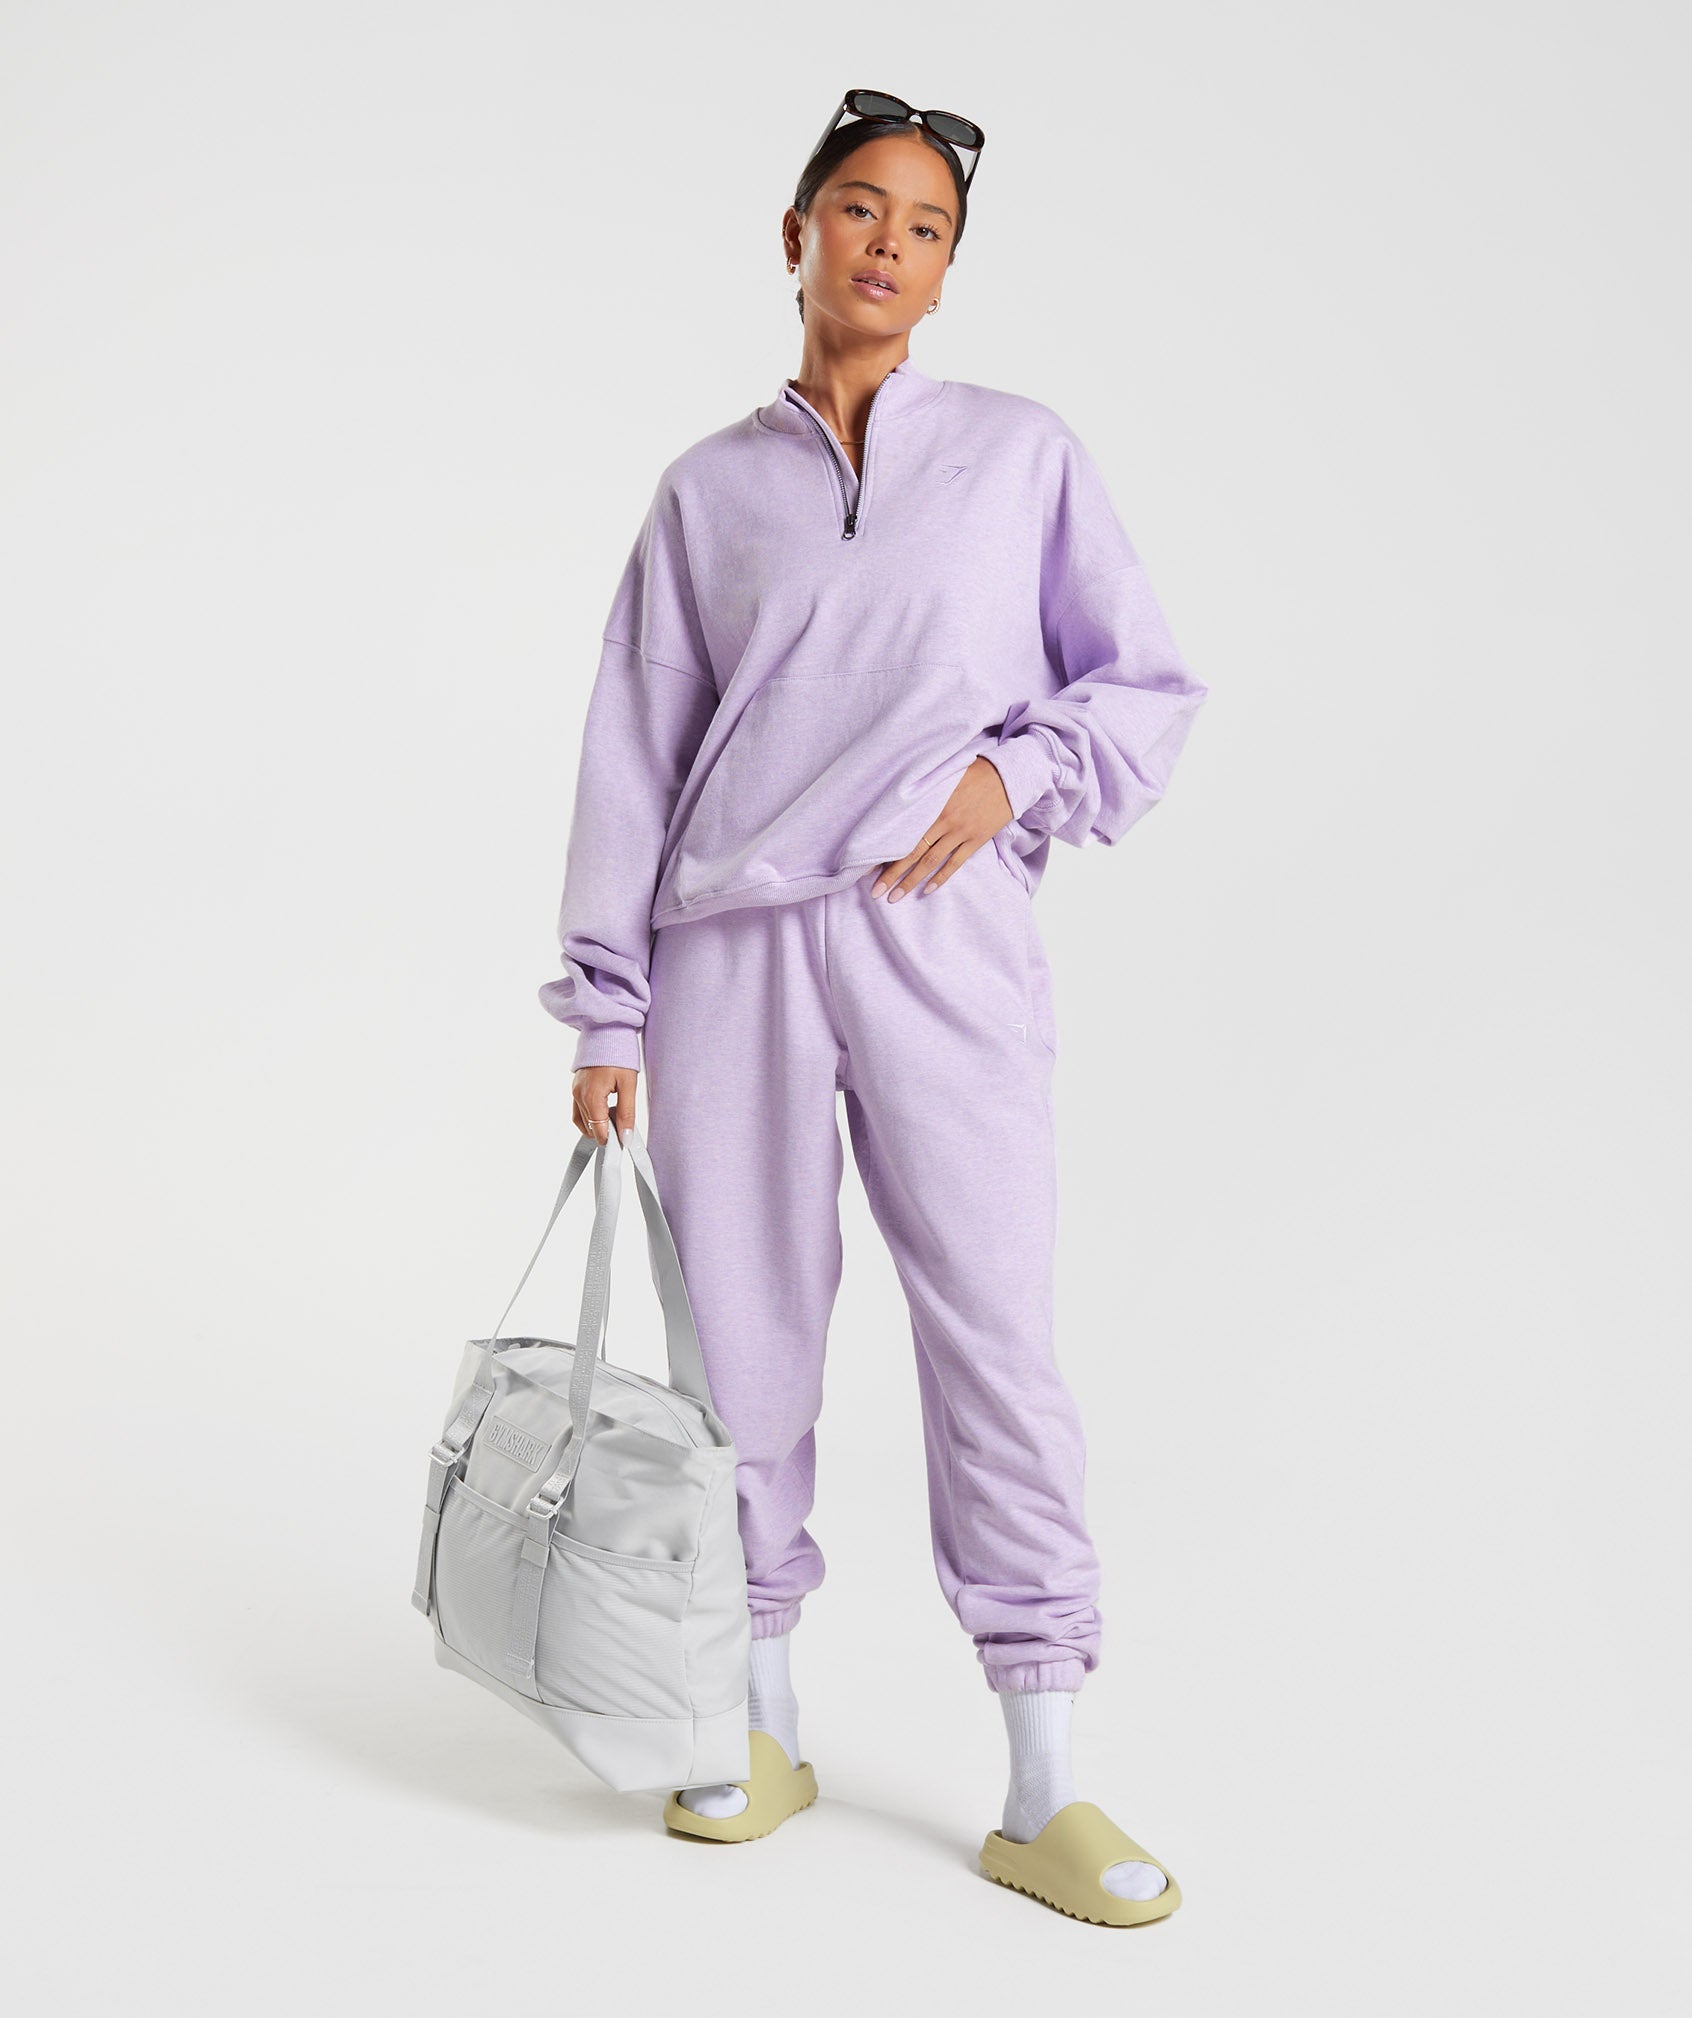 Rest Day Sweats 1/2 Zip Pullover in Aura Lilac Marl - view 5